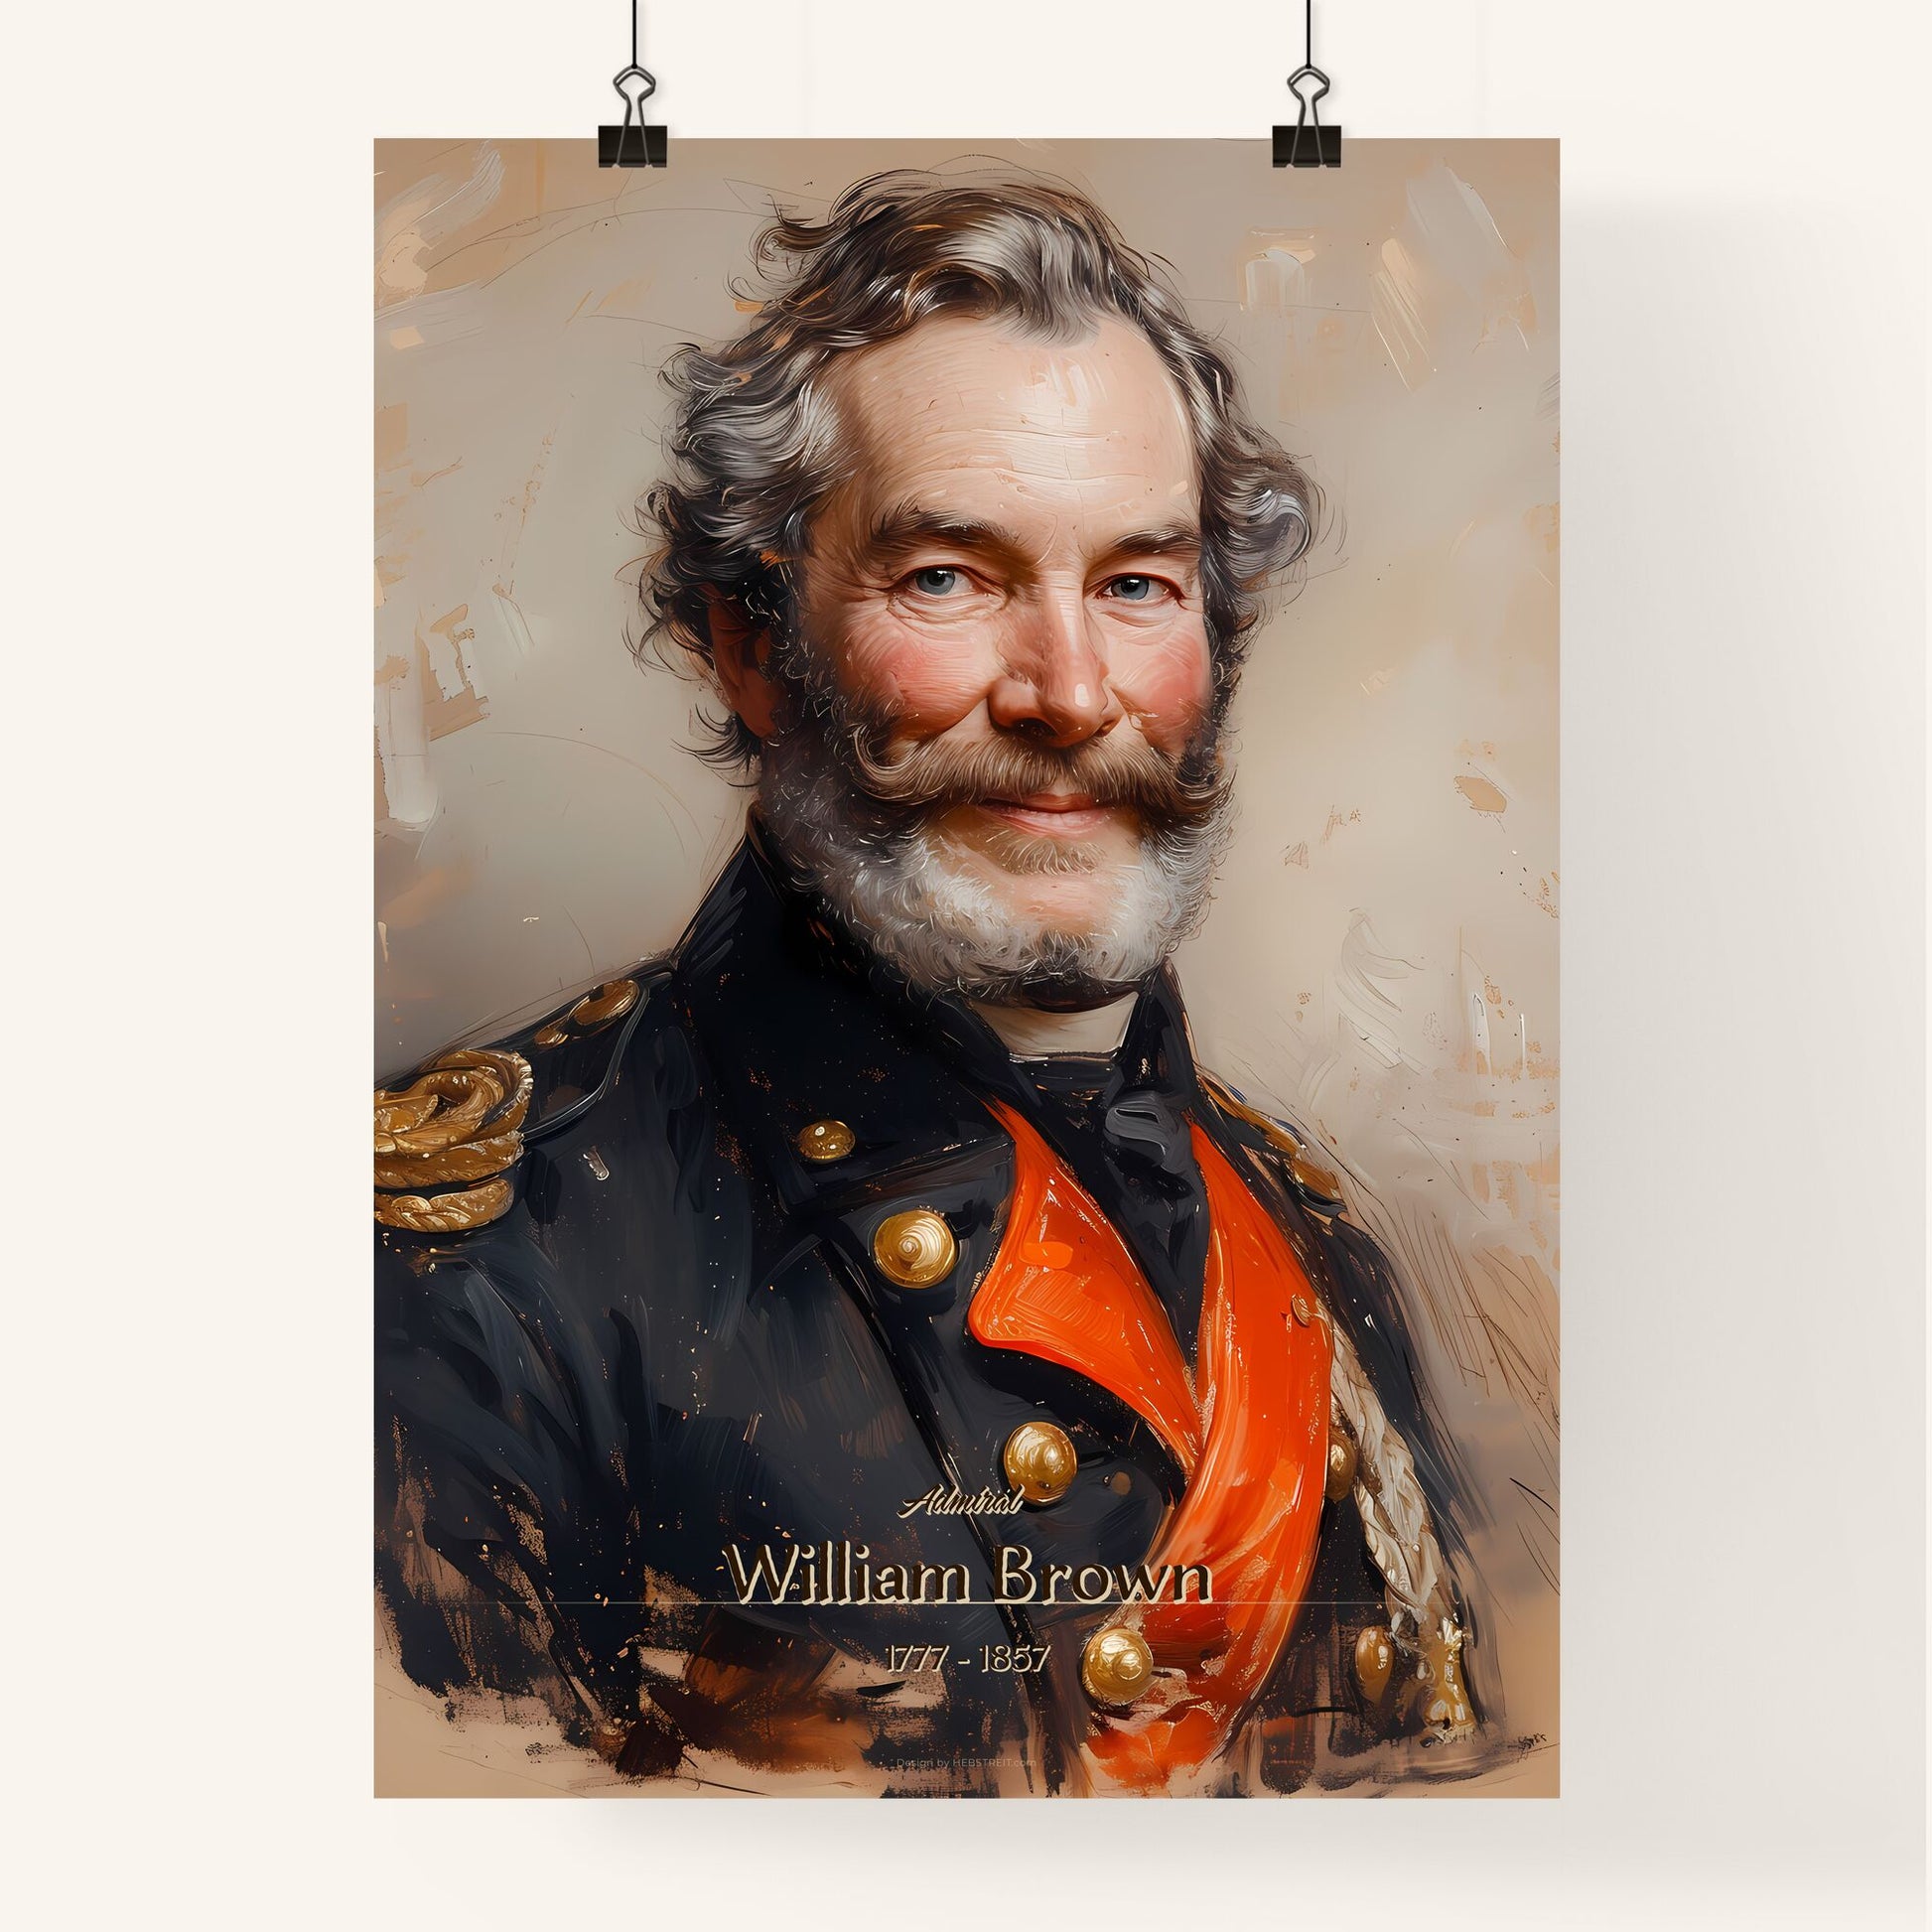 Admiral, William Brown, 1777 - 1857, A Poster of a man in a military uniform Default Title